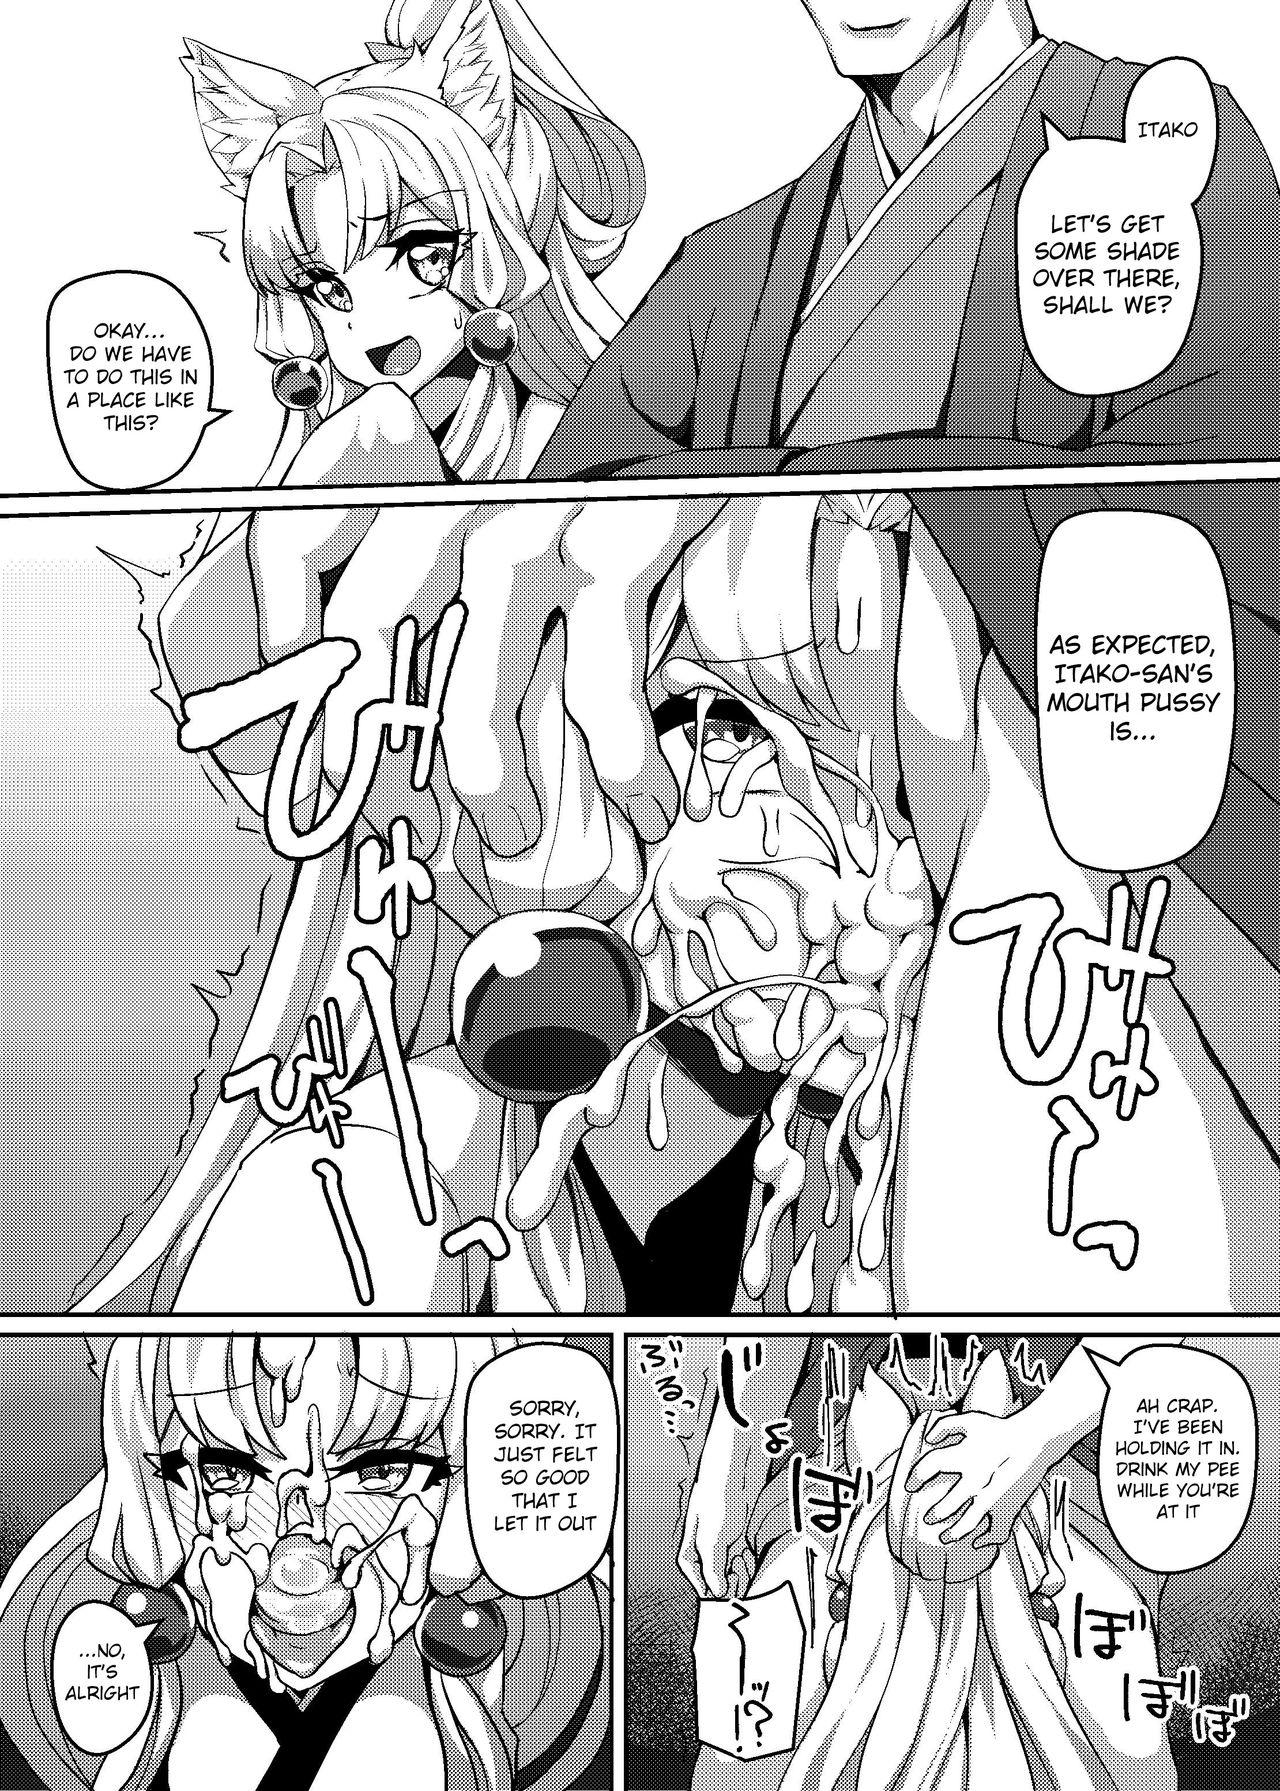 Fresh Talk Character Okuchi Only Book - Vocaloid Voiceroid Bangladeshi - Page 10